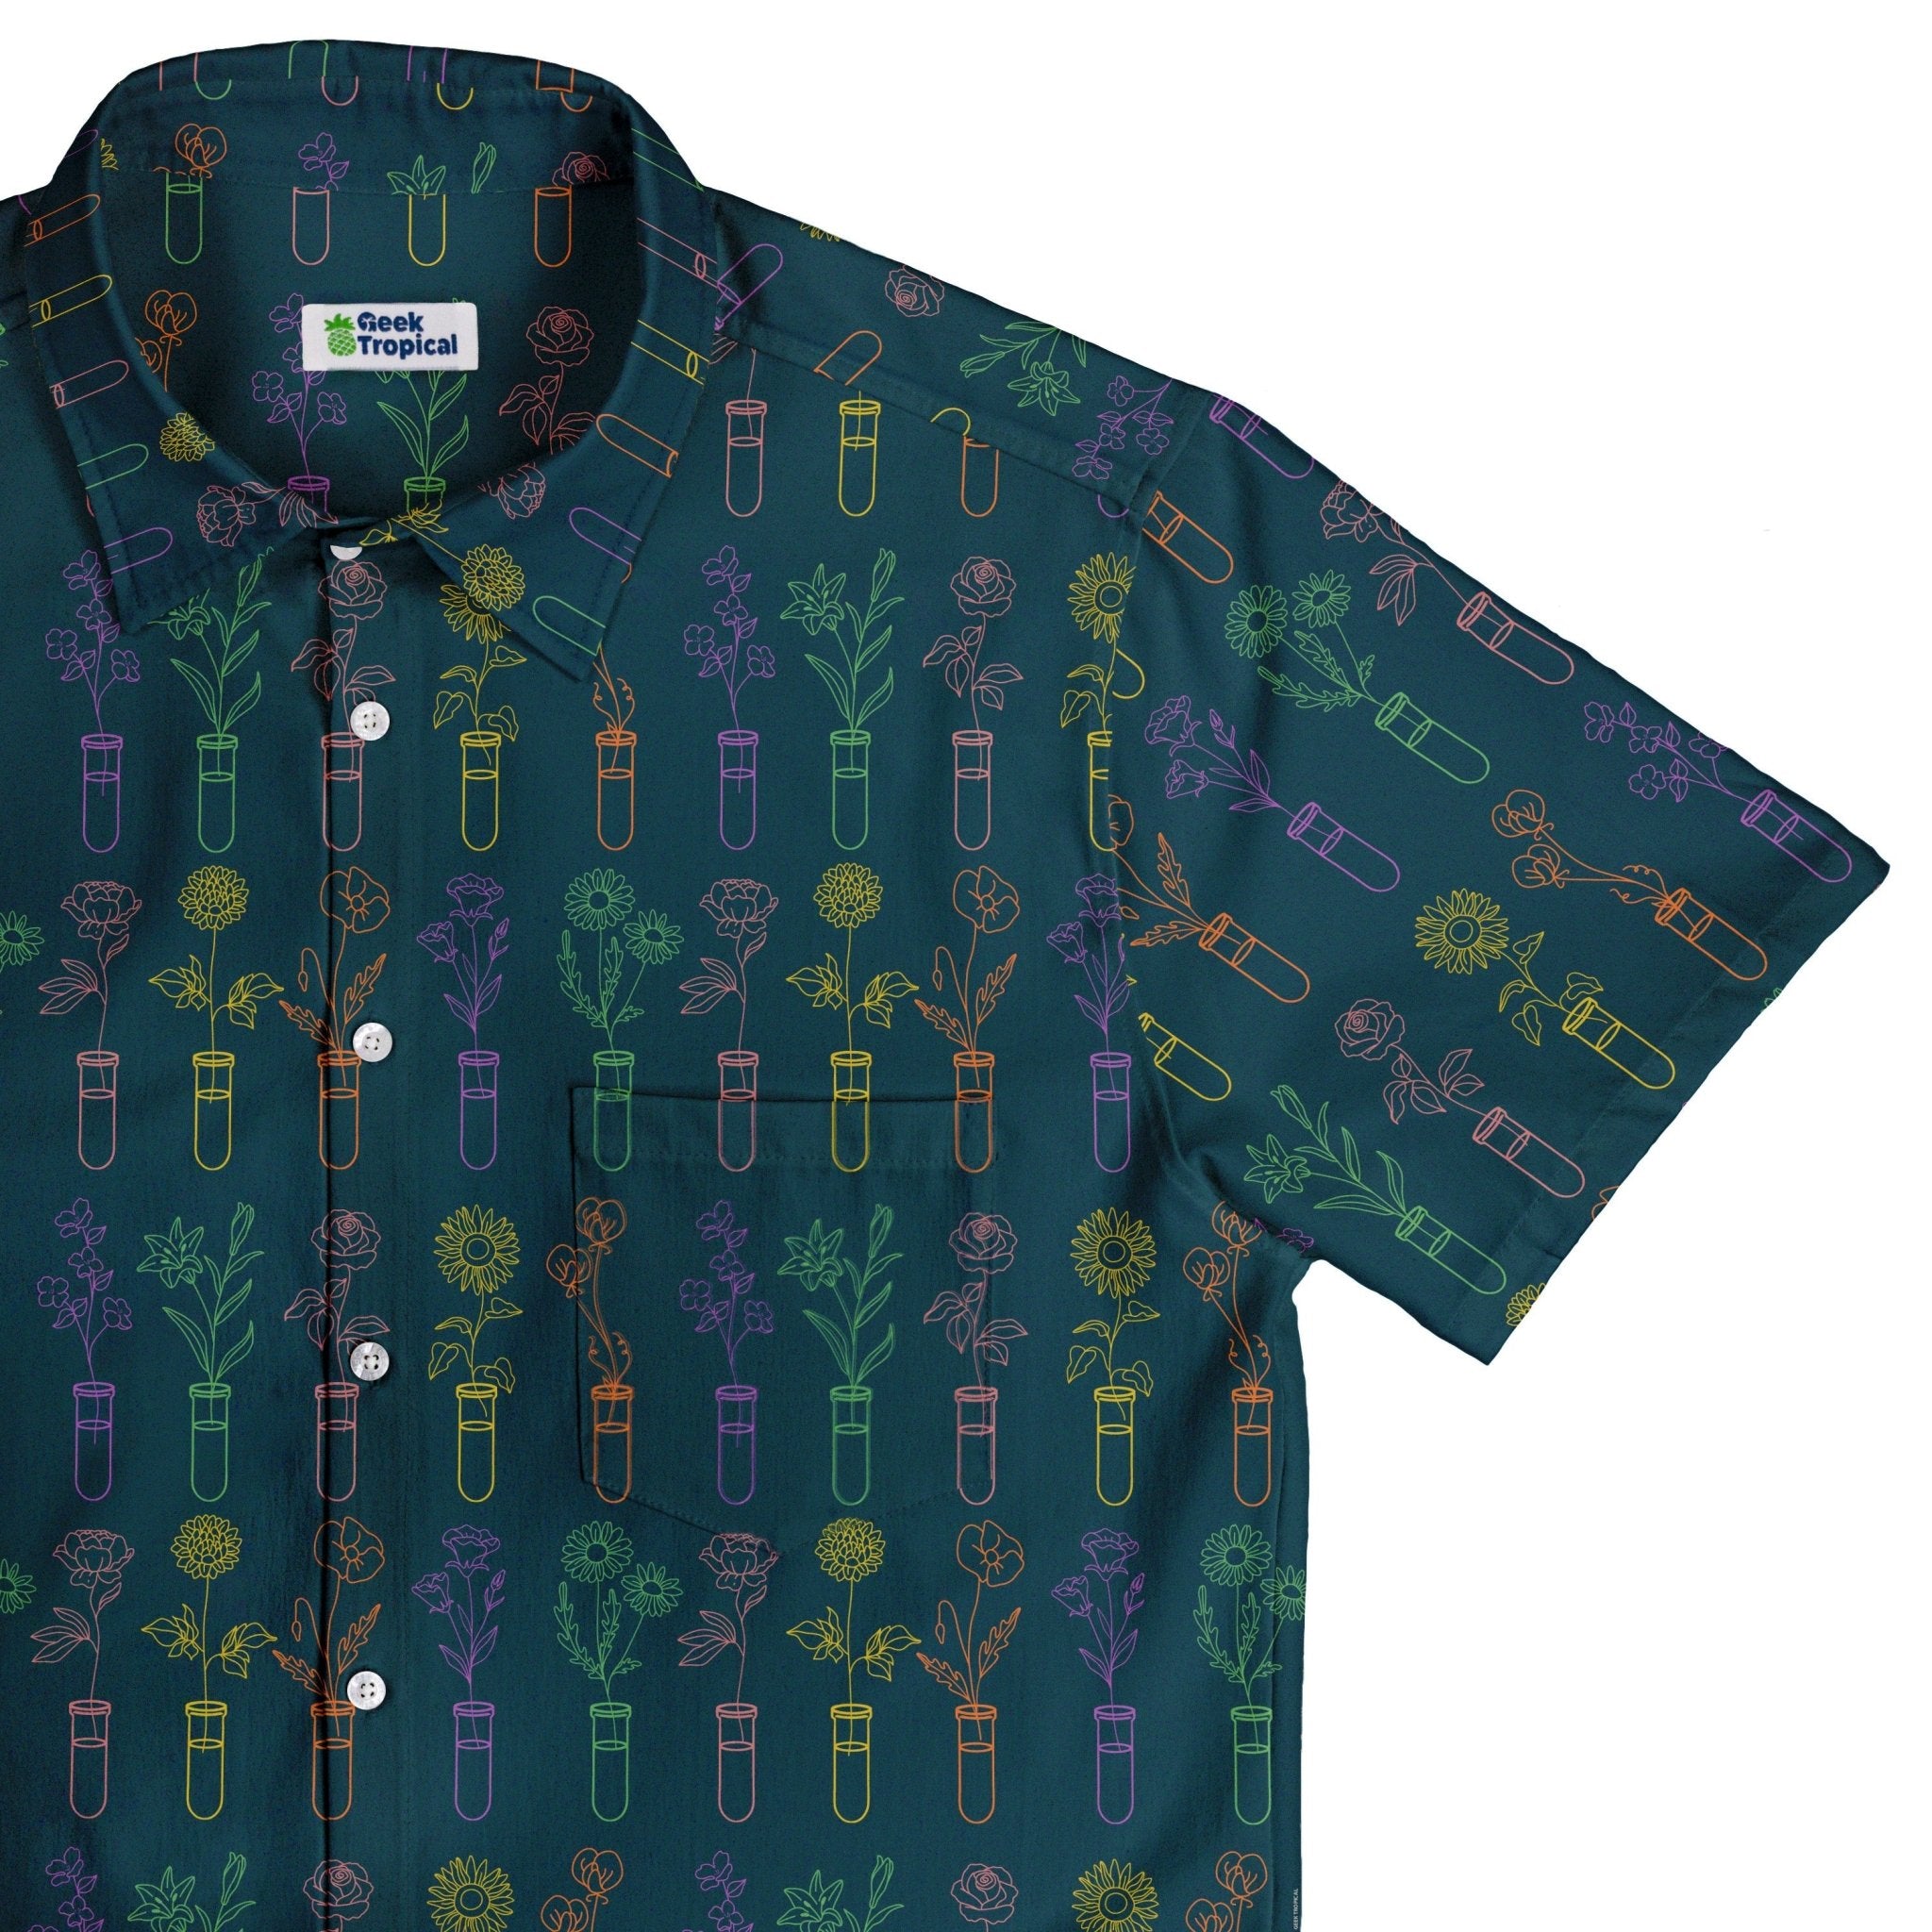 Botany Lovers Button Up Shirt - adult sizing - Botany Print - Simple Patterns